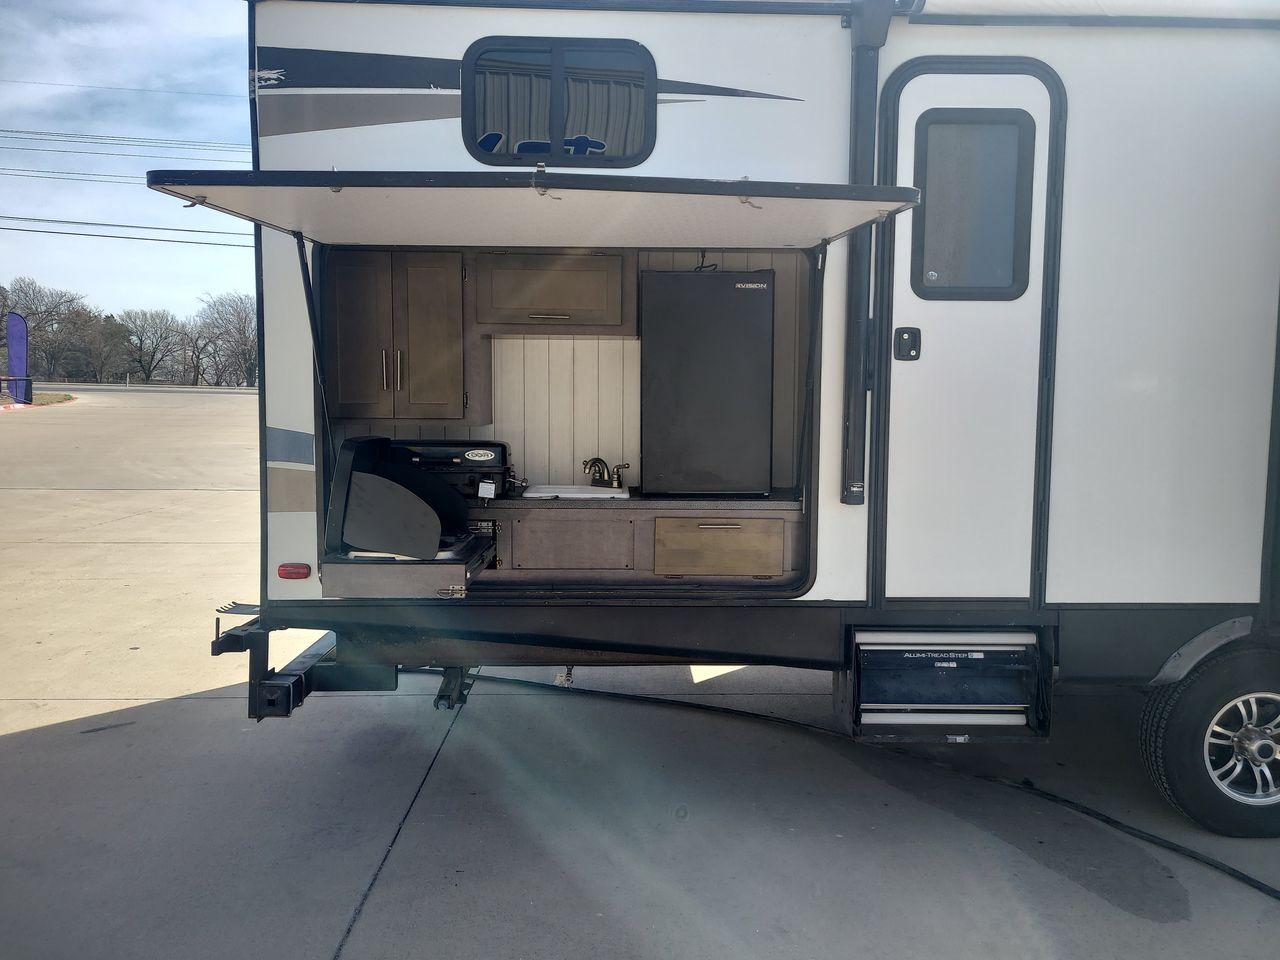 2018 KEYSTONE SUNSET TRAIL 331BH (4YDT33123J5) , Length: 37.5 ft. | Dry Weight: 7,186 lbs. | Gross Weight: 9,735 lbs. | Slides: 3 transmission, located at 4319 N Main Street, Cleburne, TX, 76033, (817) 221-0660, 32.435829, -97.384178 - Board this 2018 Keystone Sunset Trail 331BH to your family's dream destination and enjoy all the fantastic amenities it has to offer! It measures 37.5 ft. in length and 11.17 ft. in height. It has a dry weight of 7,186 lbs. with a hitch weight of 936 lbs. Its exterior is white with black graphics. I - Photo #19